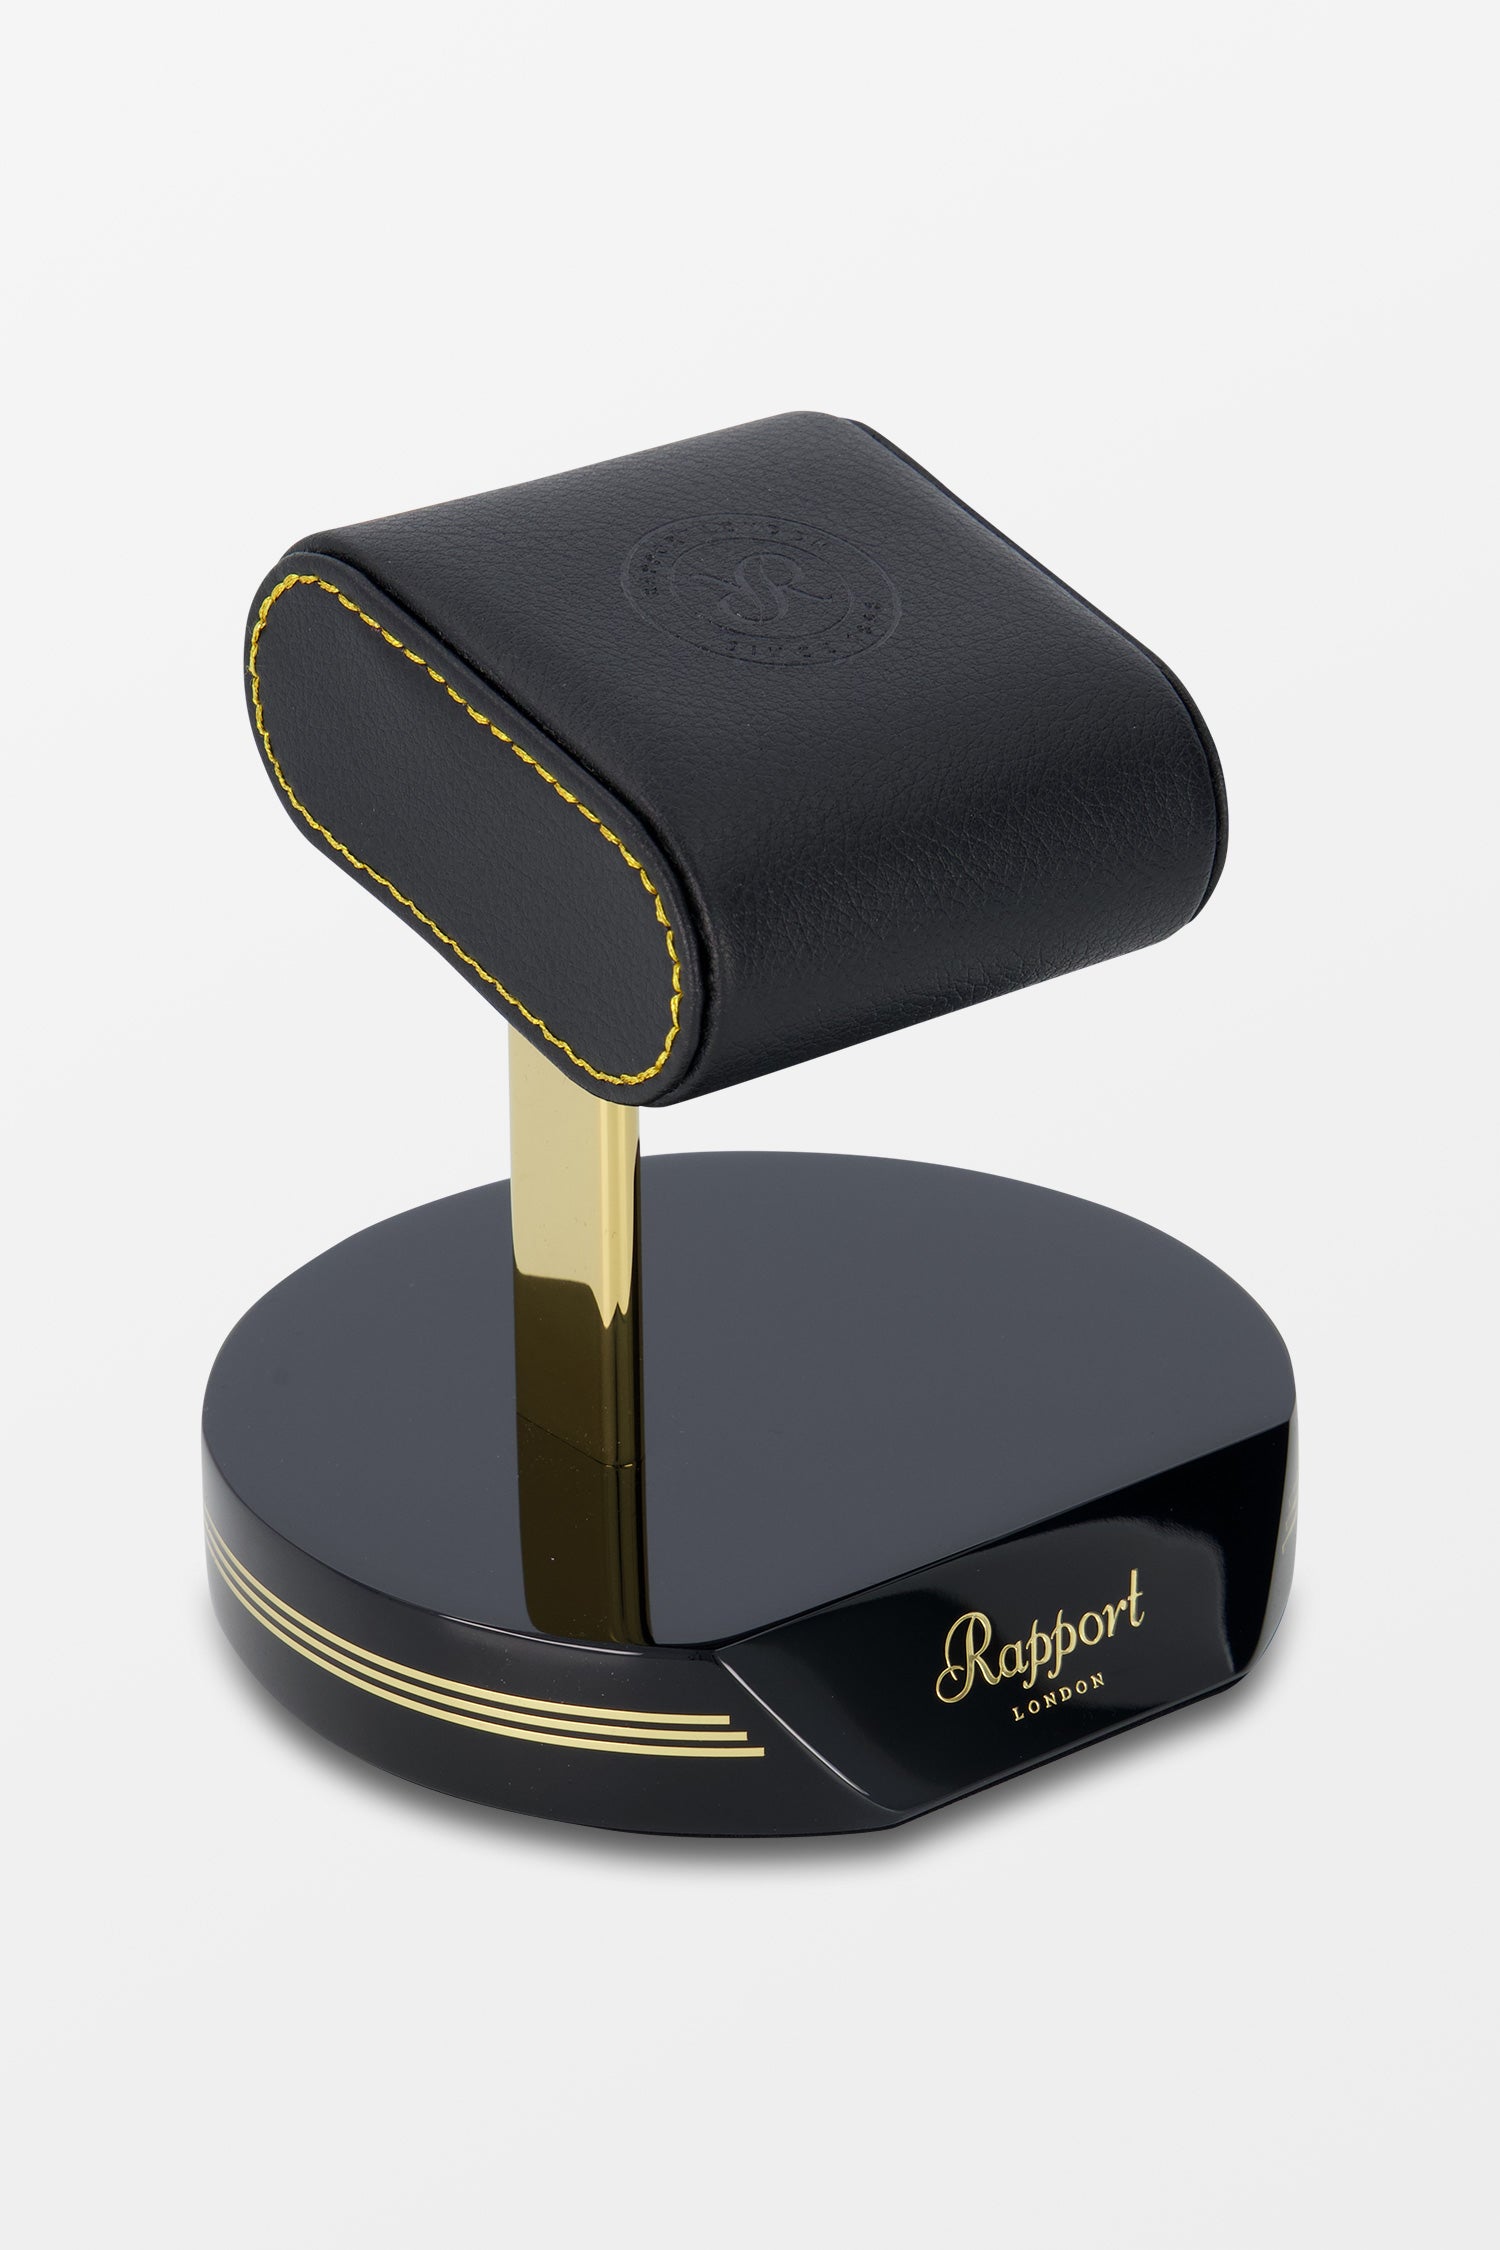 Rapport Black Gold Watch Stand